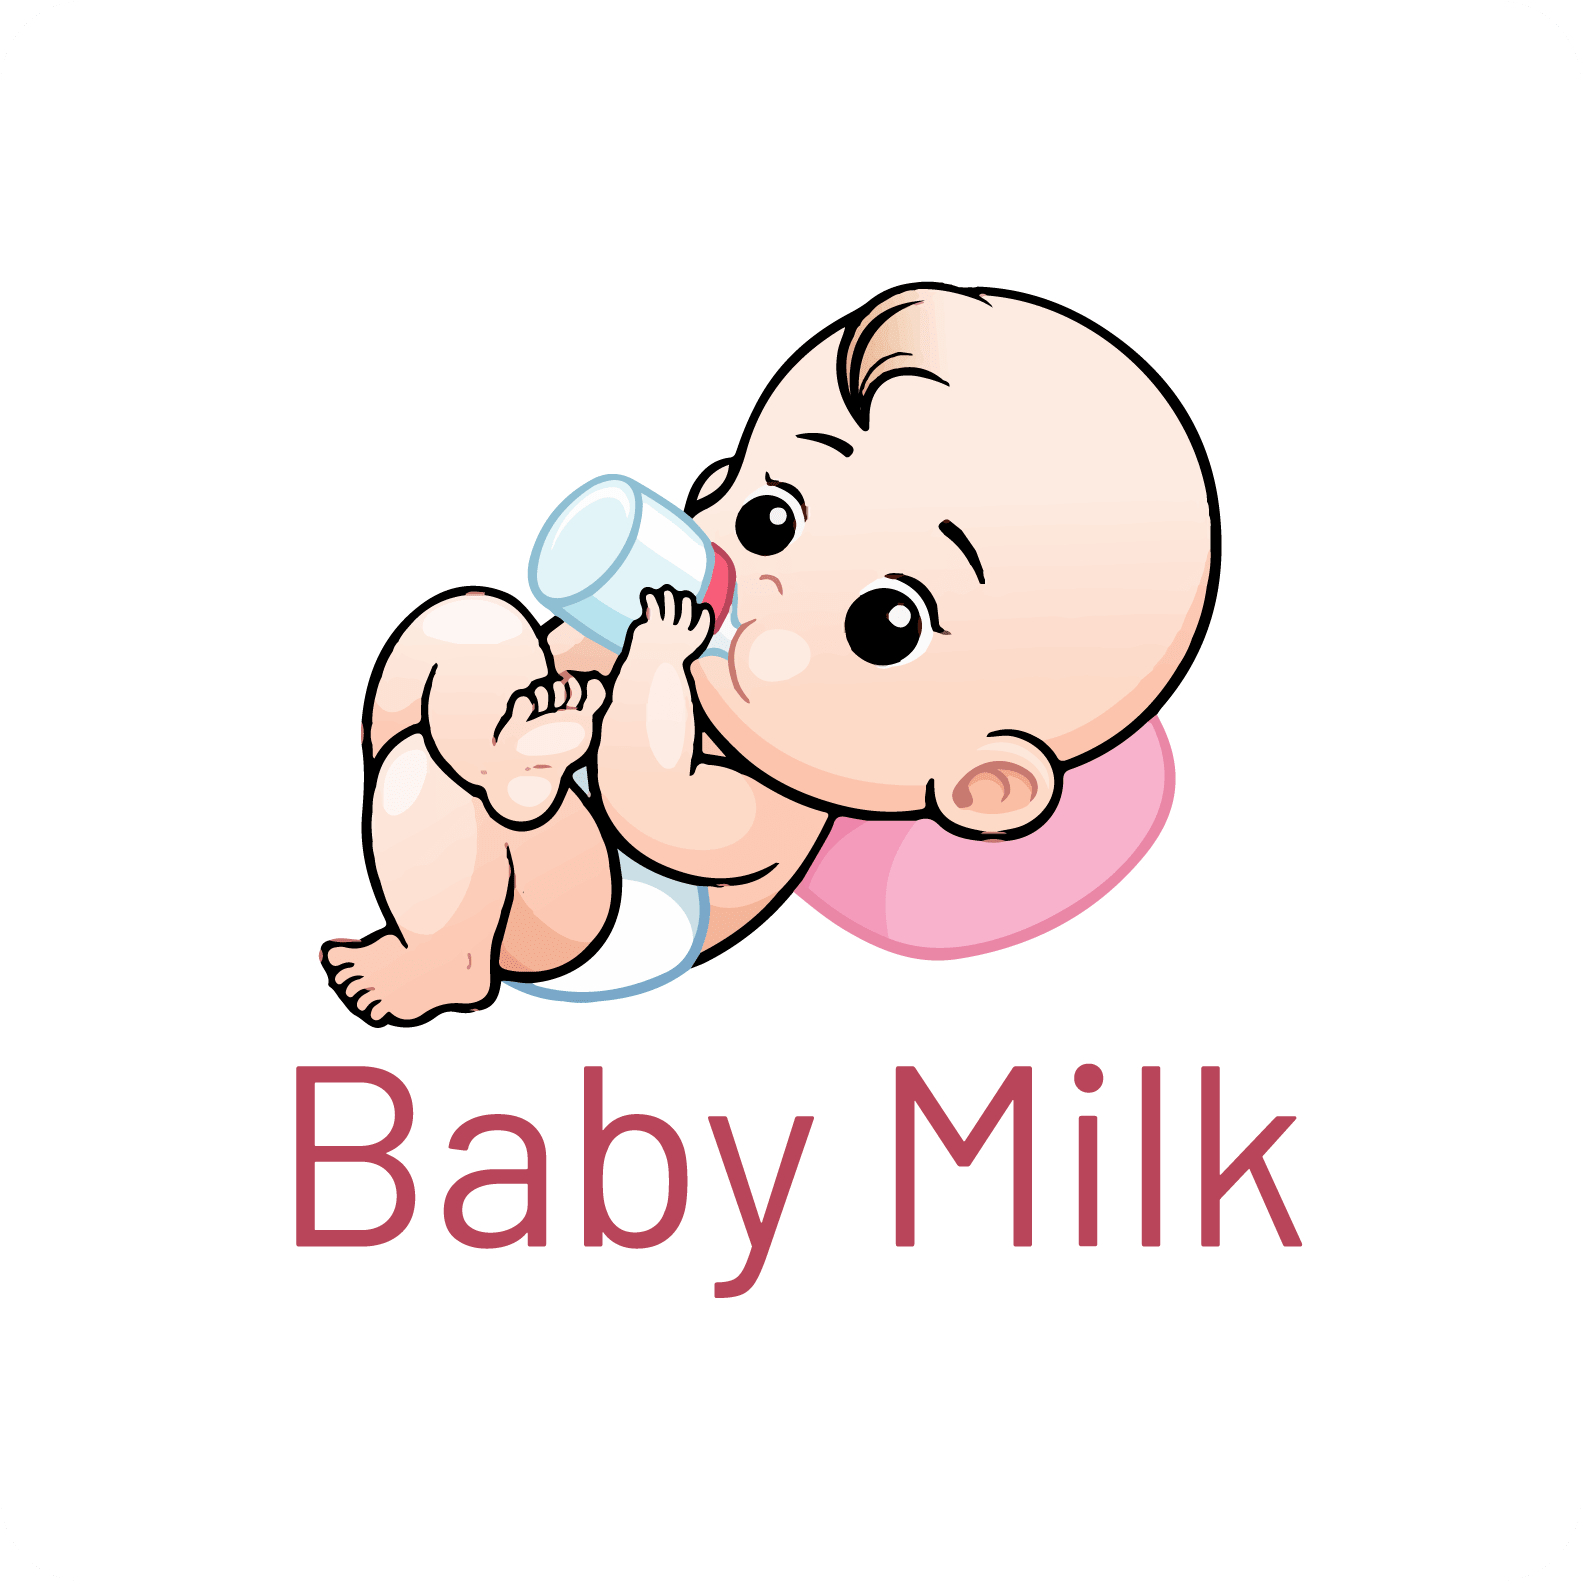 Image for baby milk category